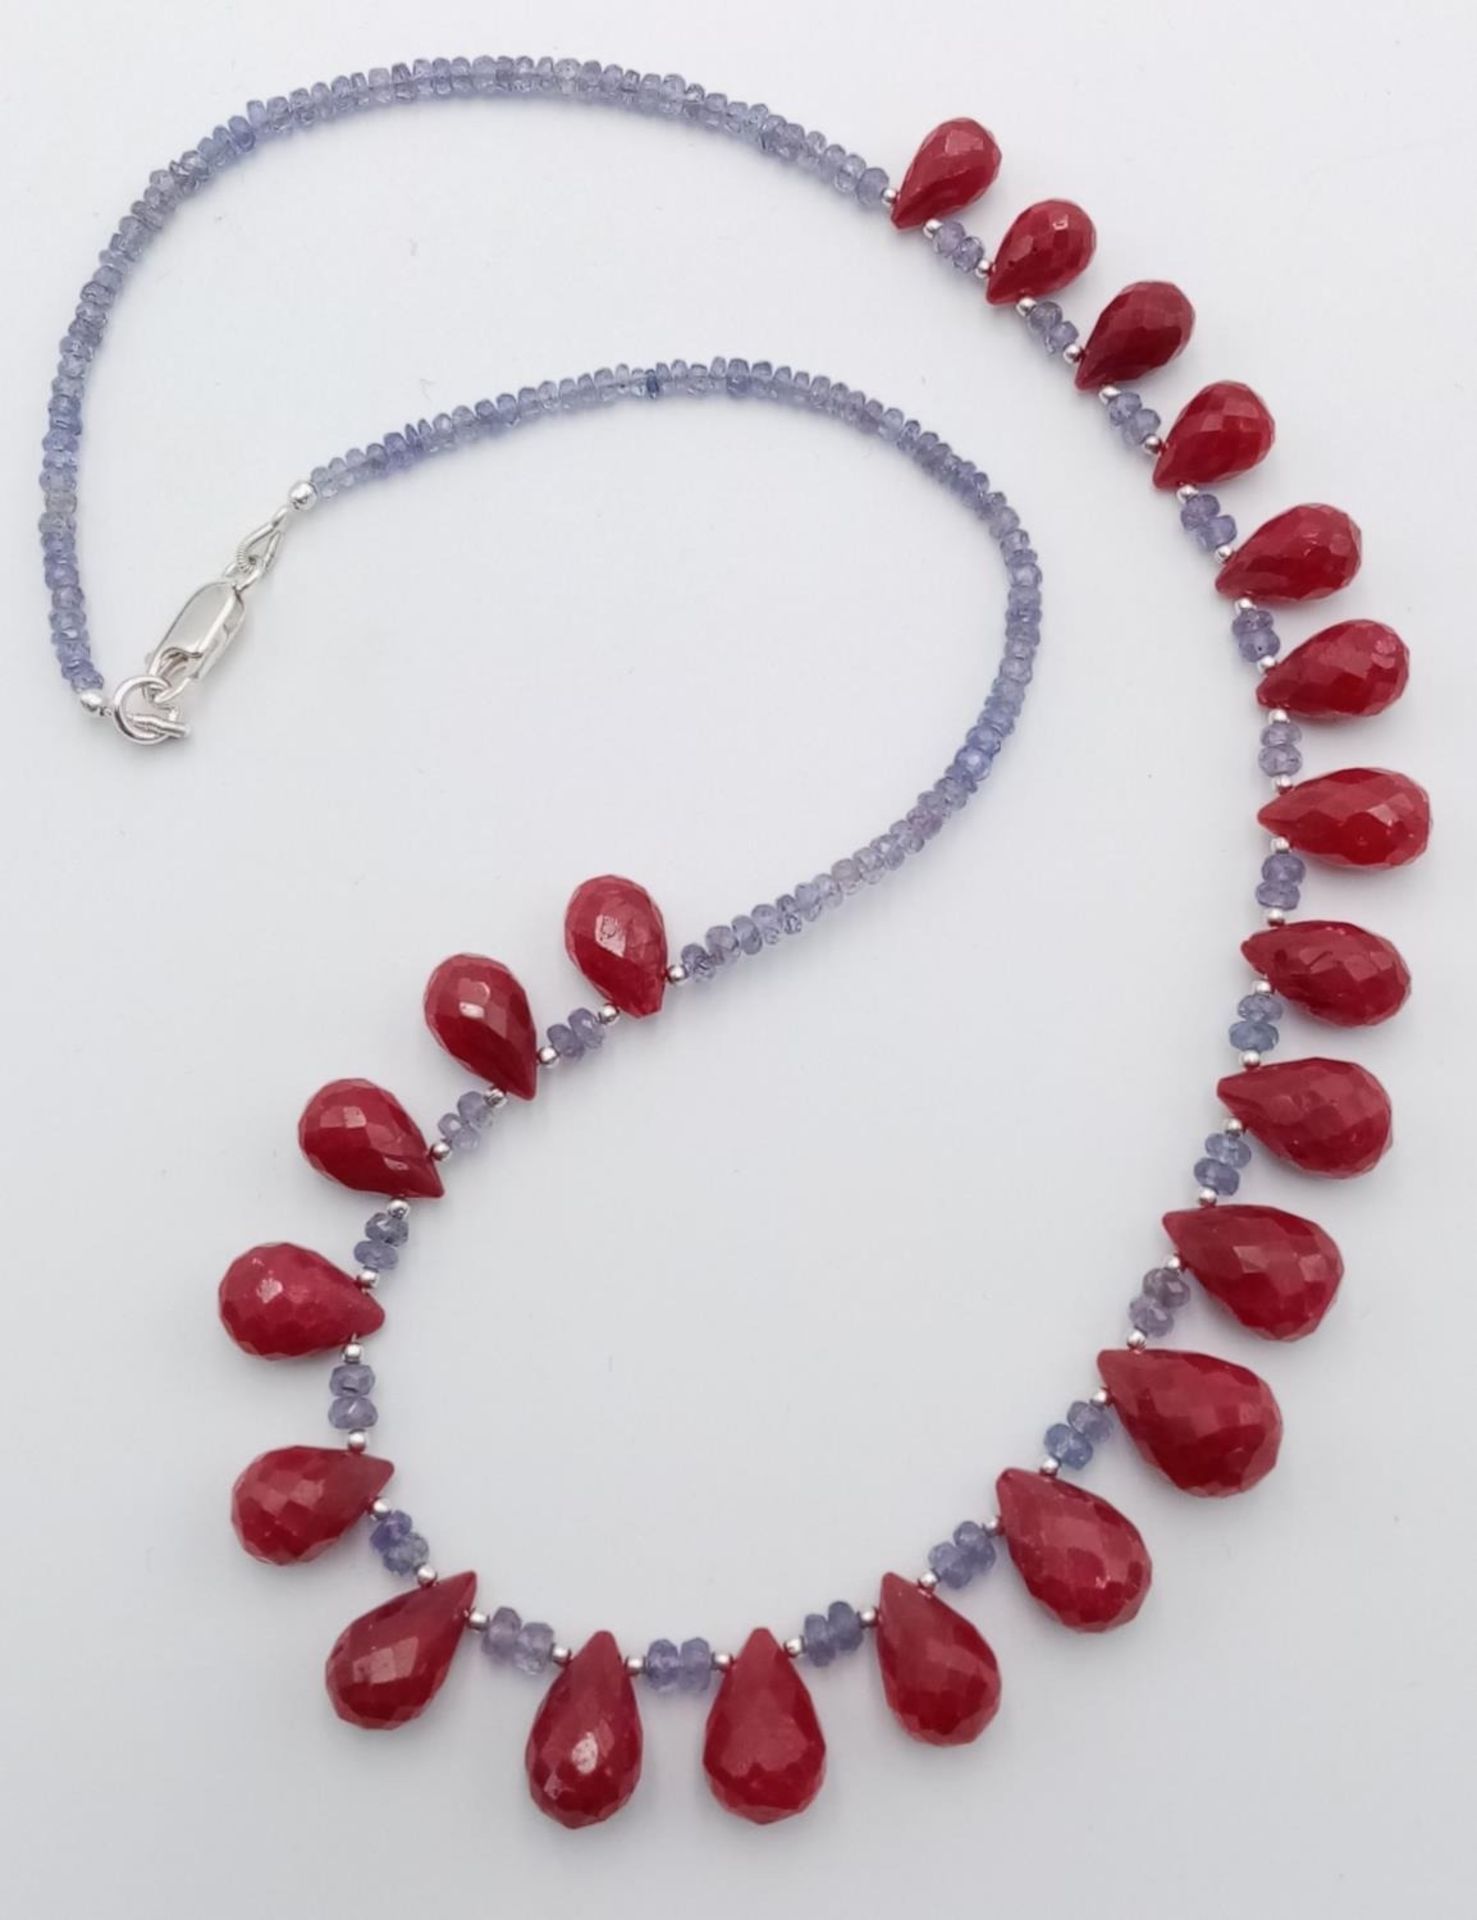 A Tanzanite Small Rondelle Necklace with Ruby Drops. 925 Silver Clasp. 150ctw gemstones. 42cm - Image 2 of 4